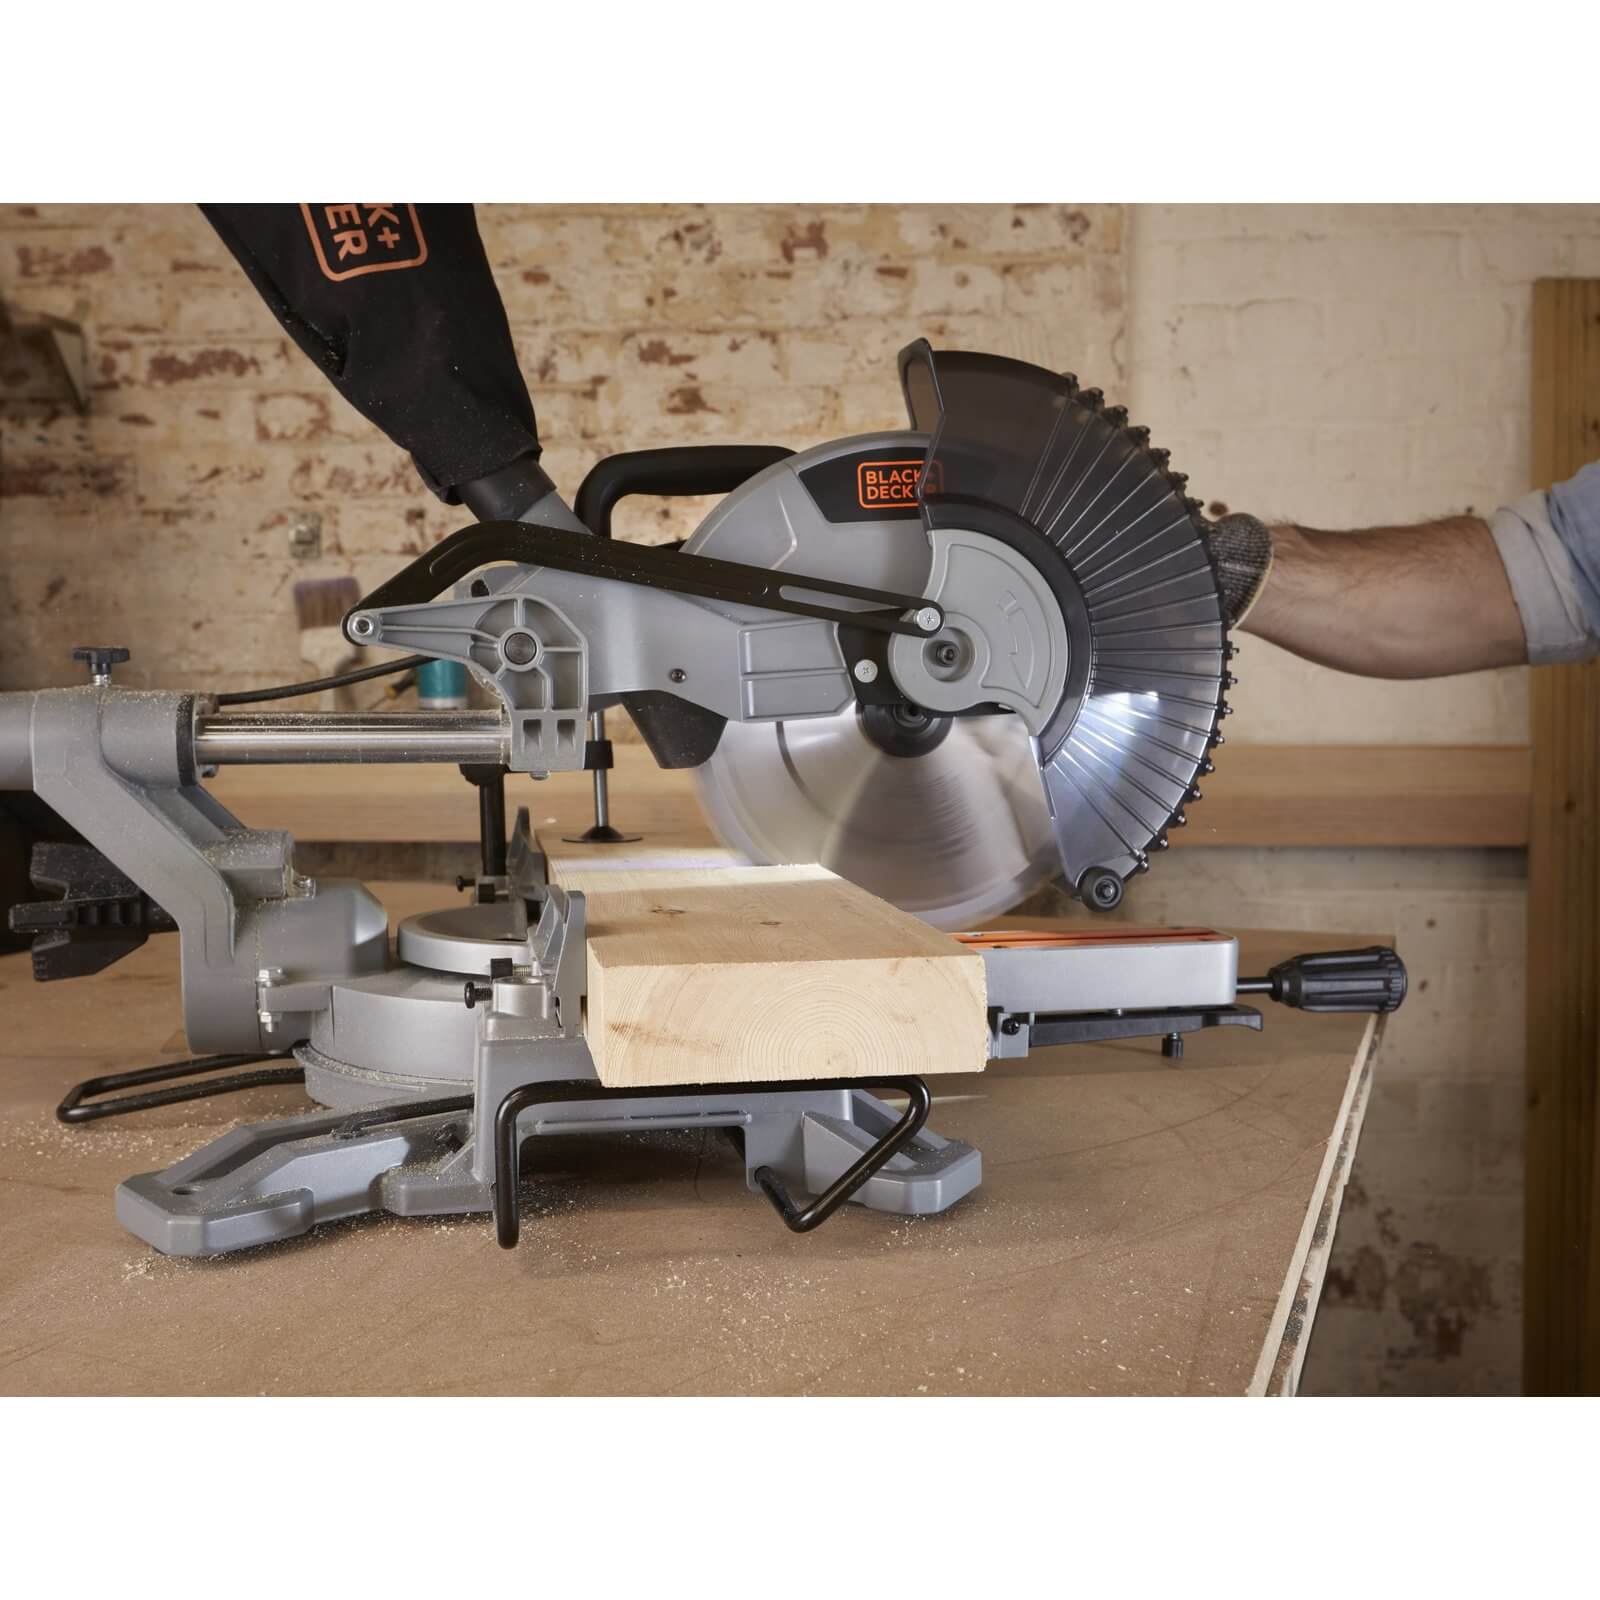 Photo of Black+decker 254mm 2100w Corded Sliding Compound Mitre Saw -bes710-gb-